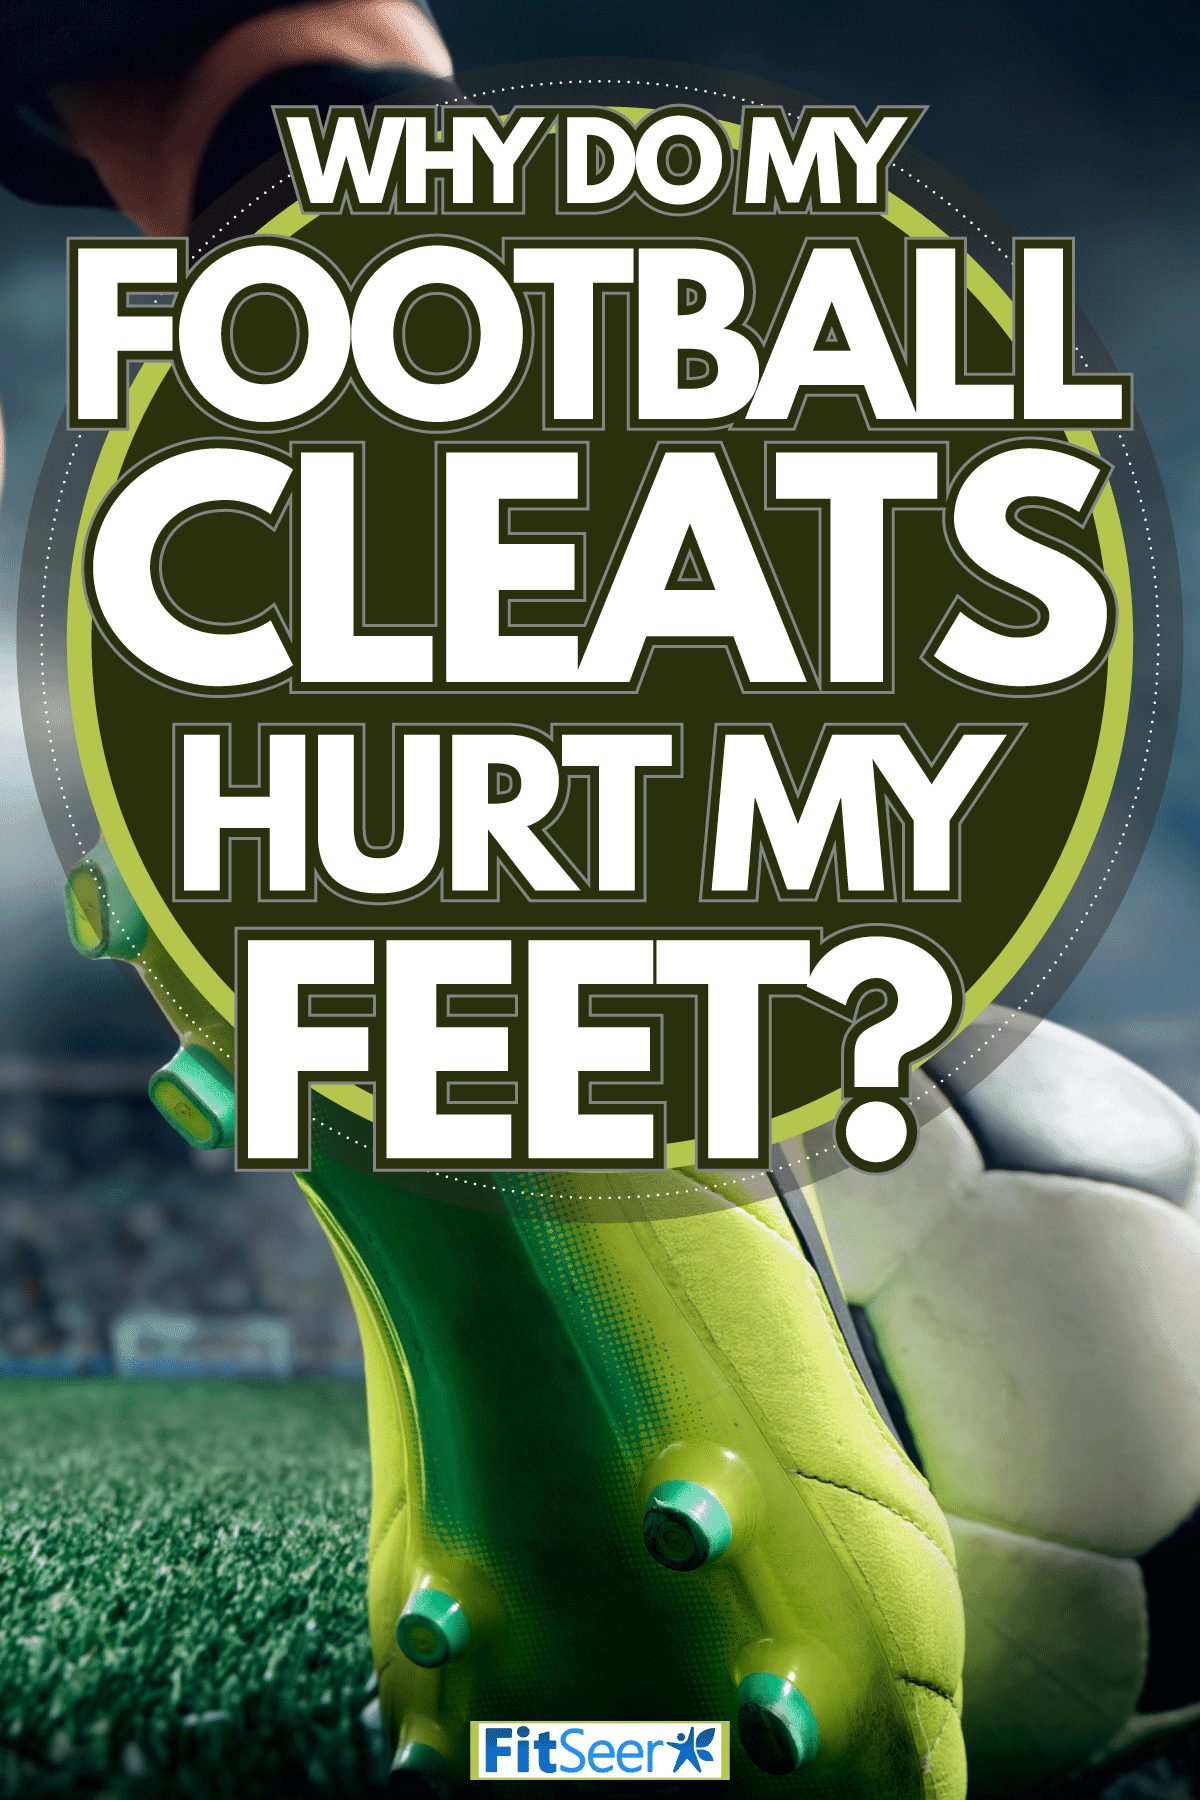 ground shot of a soccer player's foot wearing a lime-green shoe kicking a soccer ball, Why Do My Football Cleats Hurt My Feet?